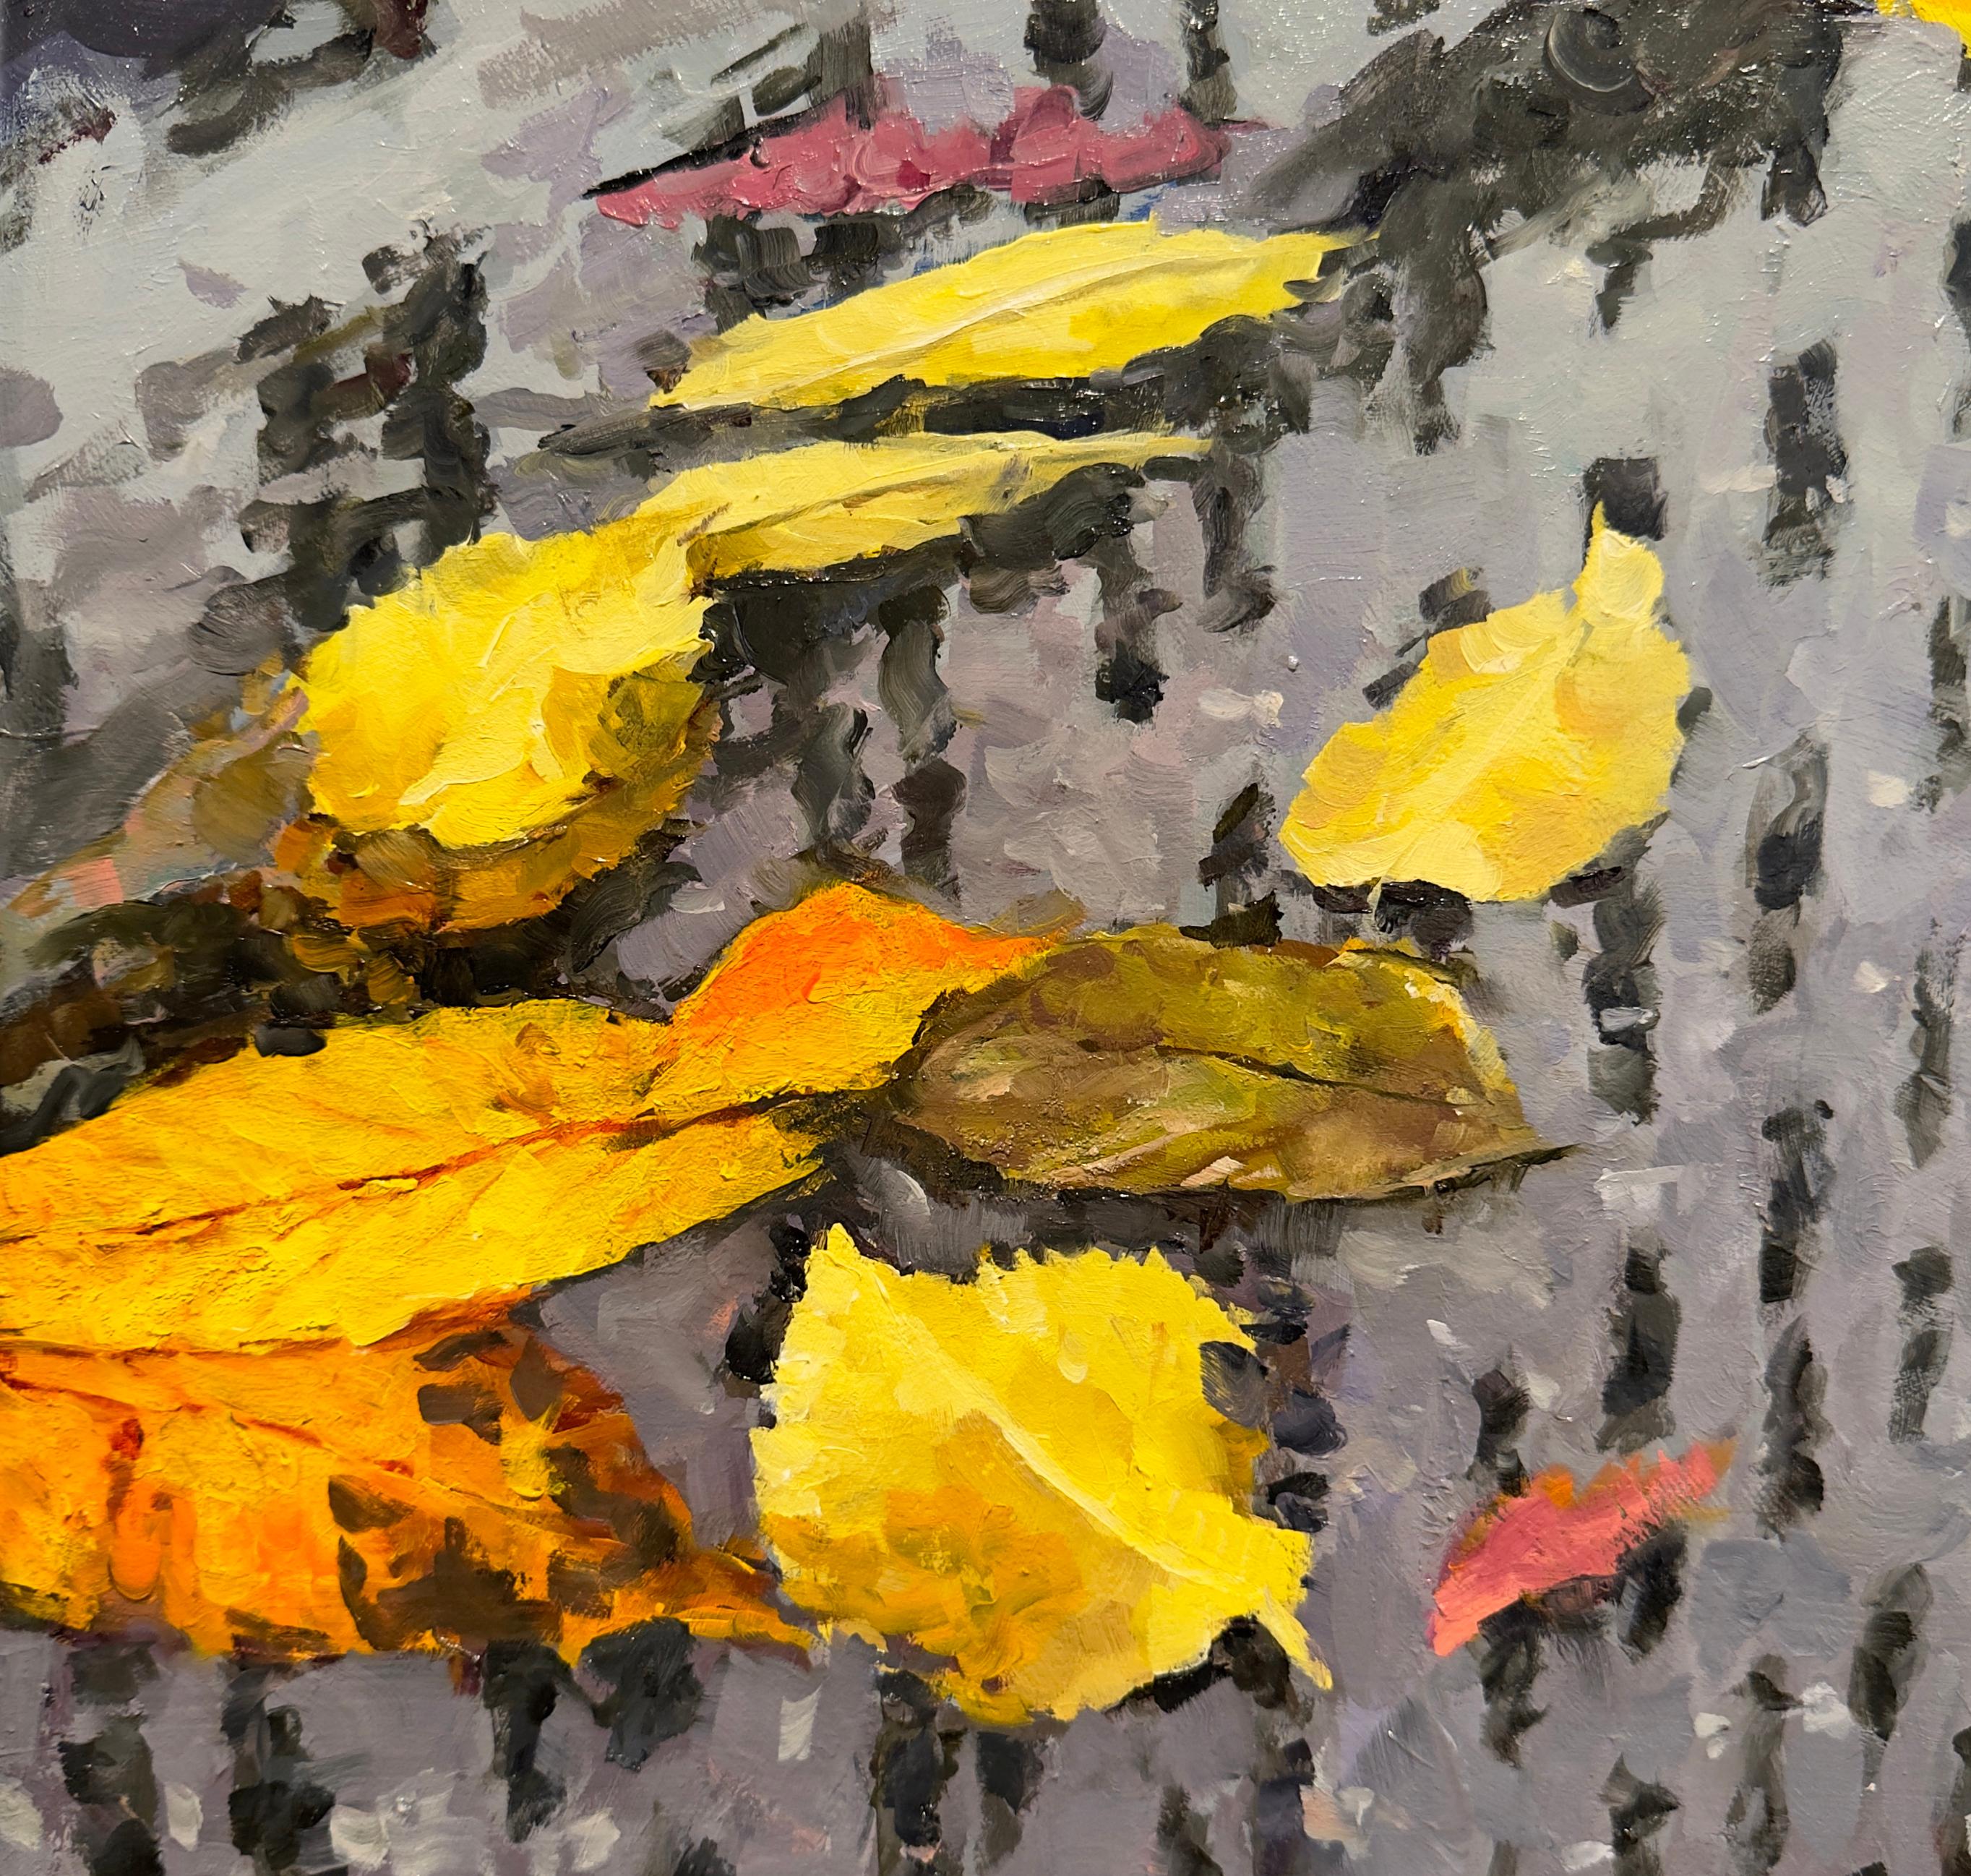 REFLECTION CENTRAL PARK SOUTH - Contemporary Realism / New York Citys / Autumn For Sale 2